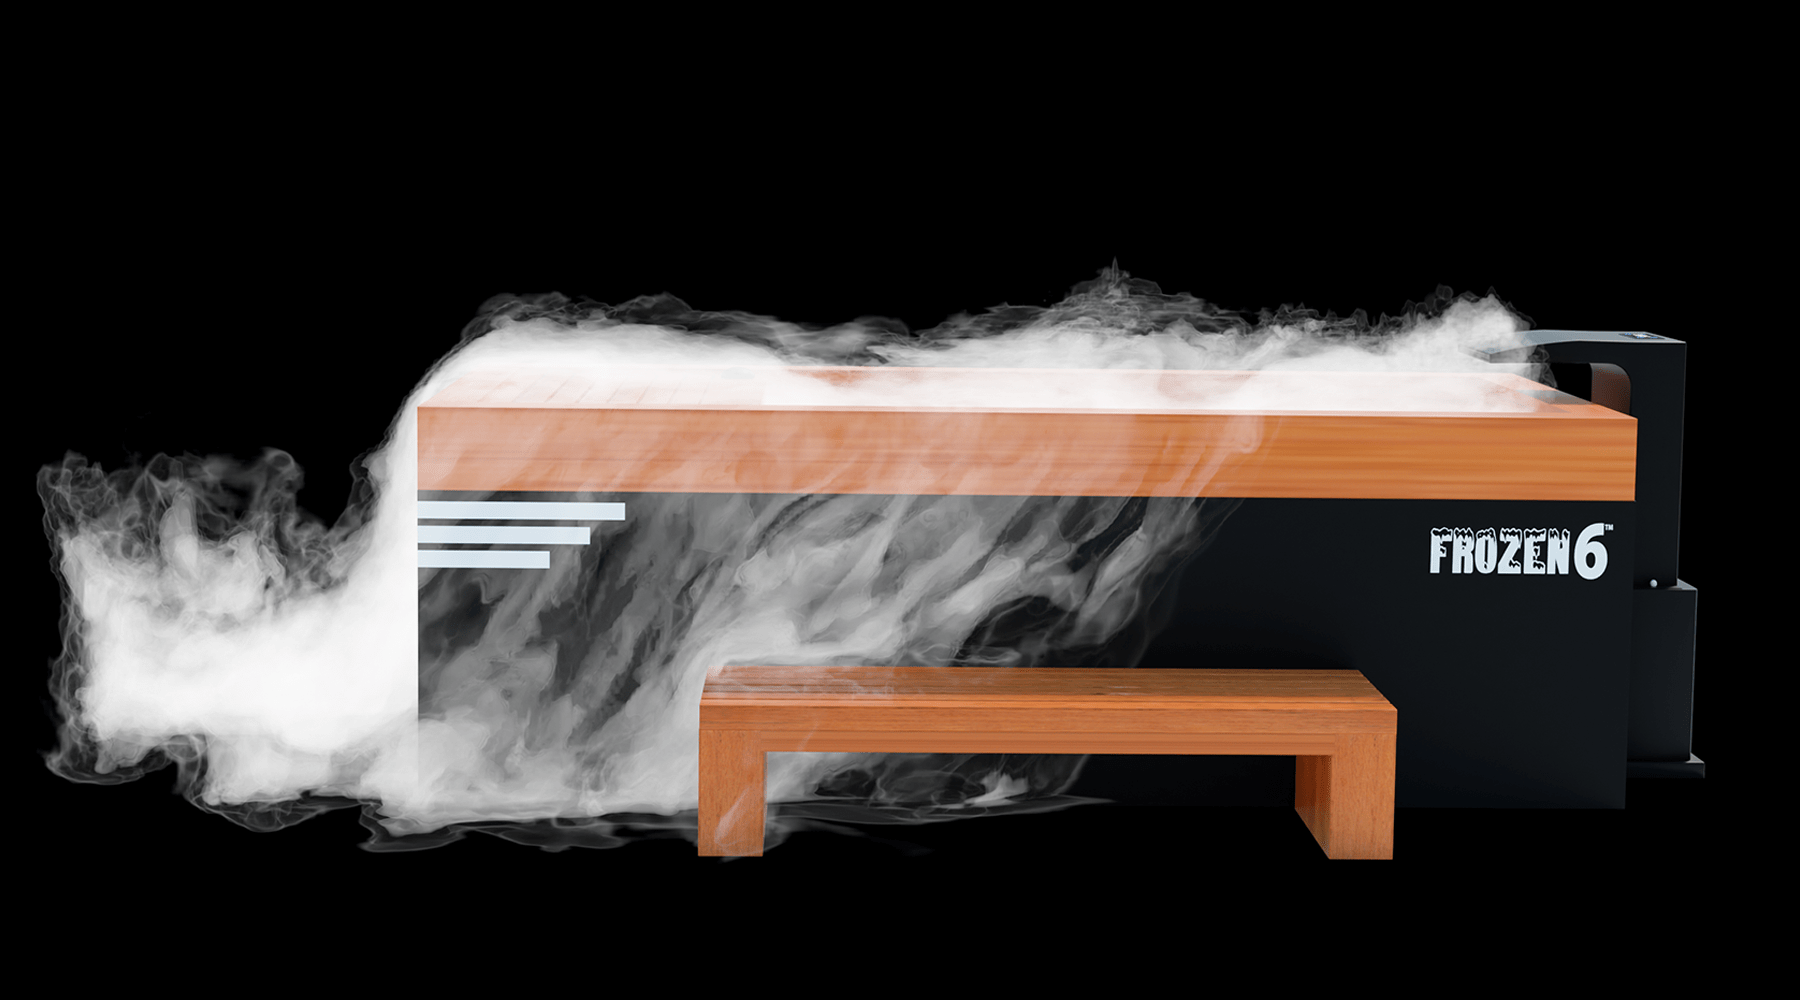 Medical Breakthrough - Frozen 6 Cold Plunge - Bar Counter & Heavy Duty Step / Essential Oil Infuser & Steam Generator